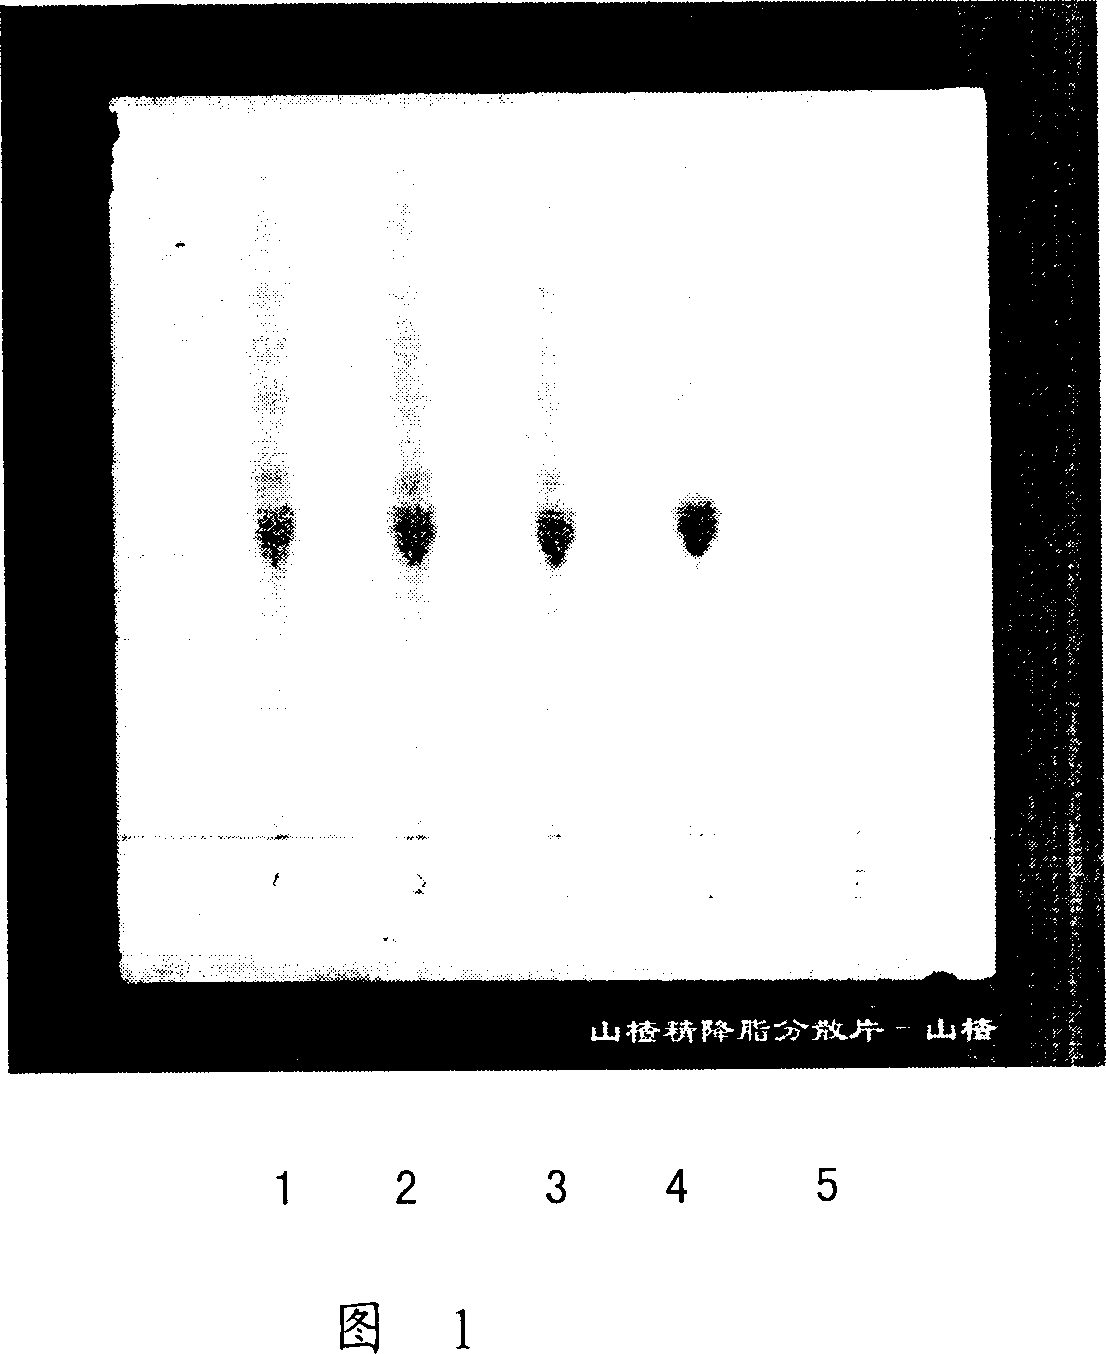 Method for identifying hawthorn of hawthorn extract lipid-lowering dispersion tablet